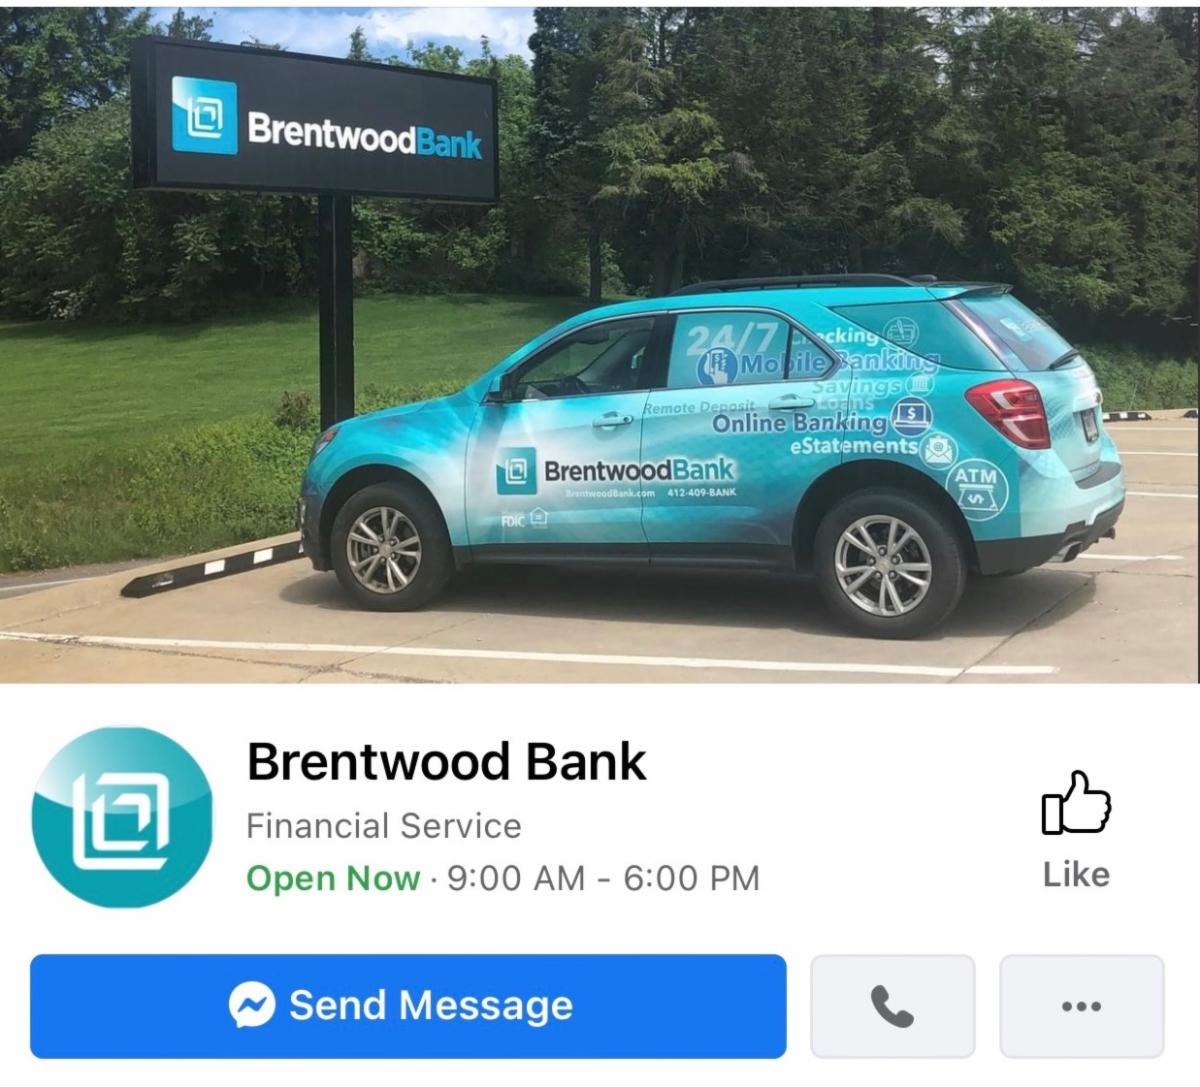 Facebook post with picture of Brentwood Bank car.